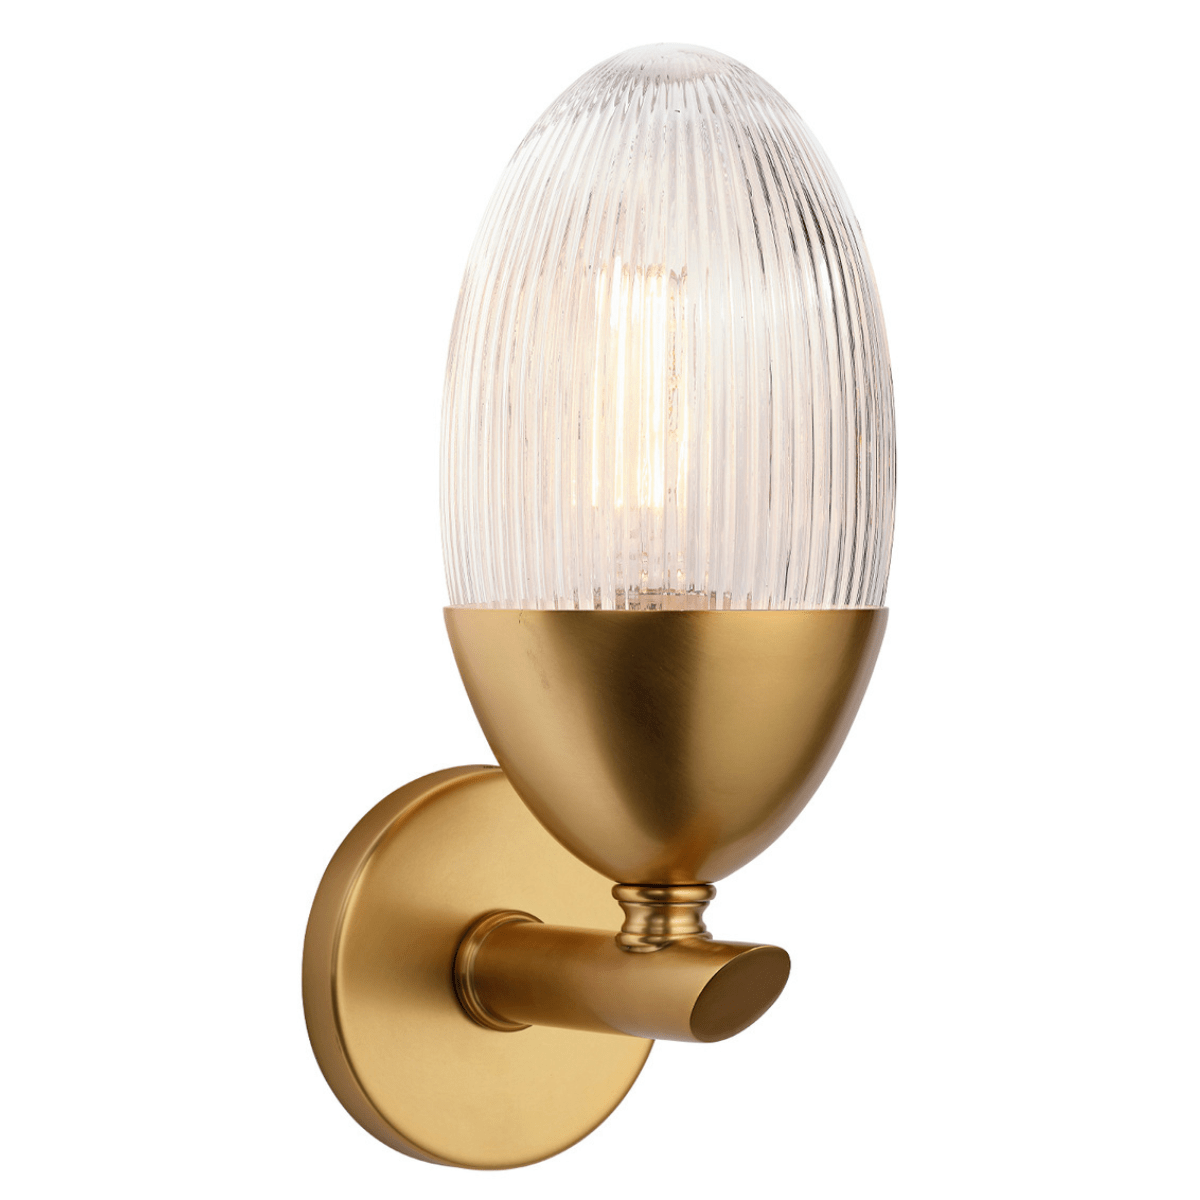 Whitworth Sconce Wall Lighting 4WHIT-SMAB 688933037623